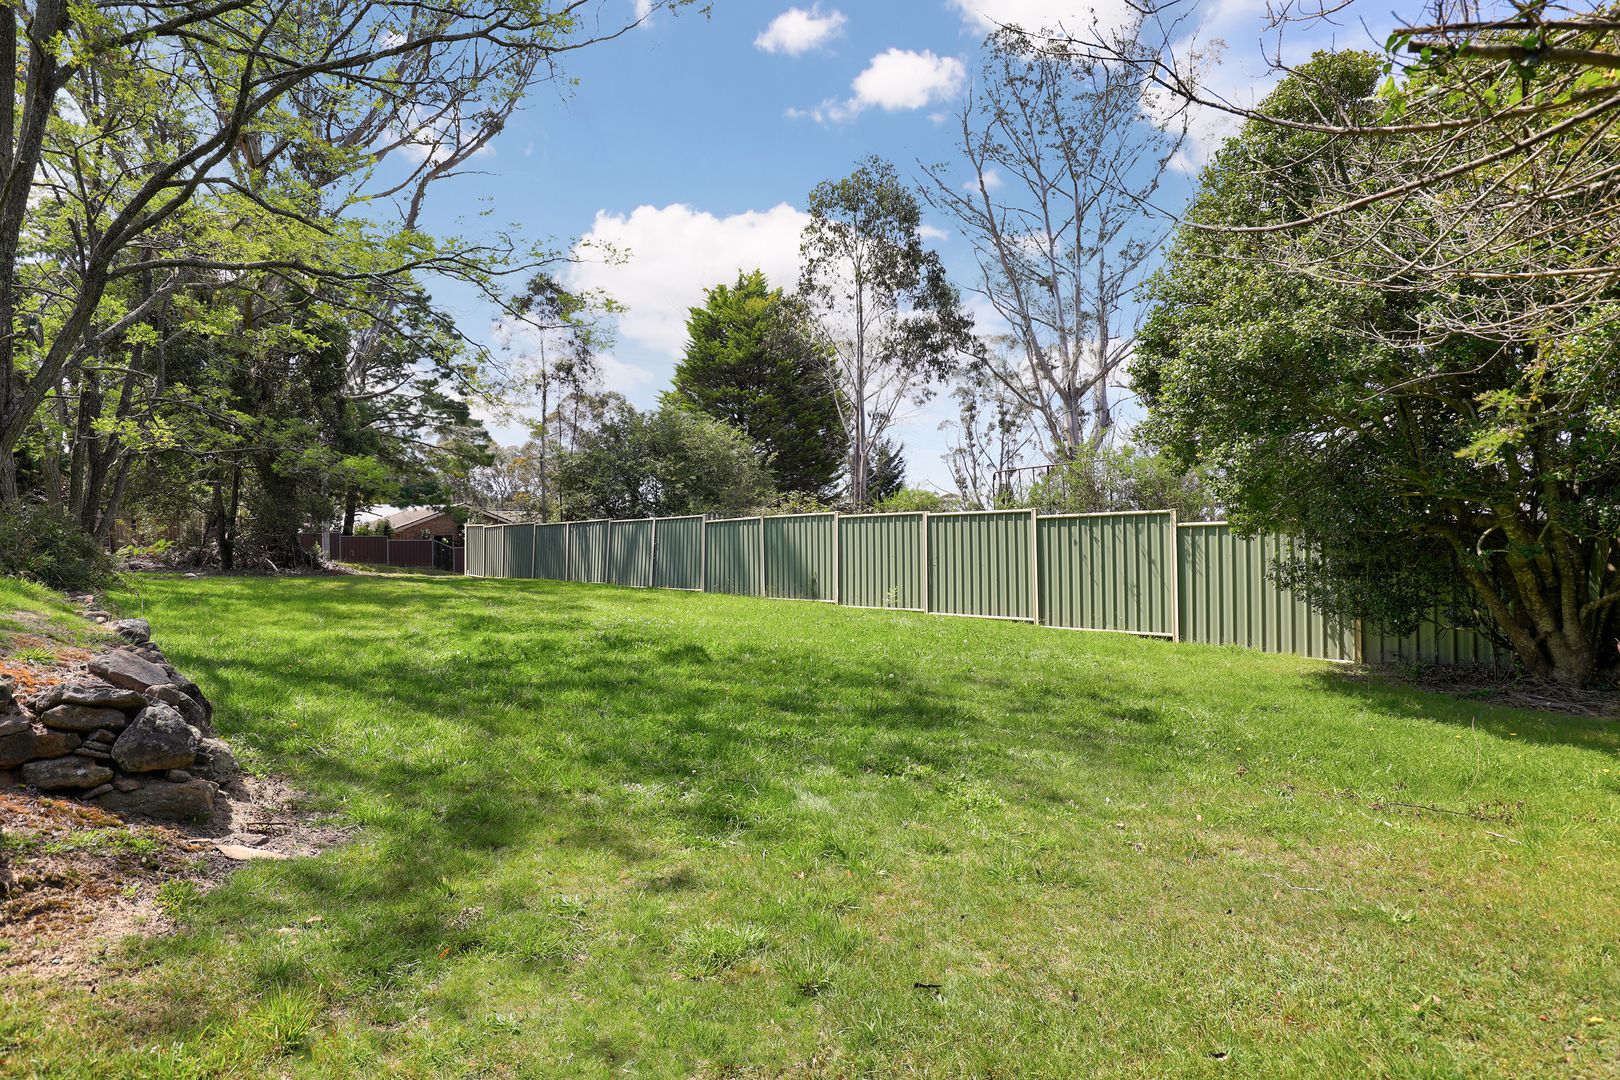 Lot 5 / 32 Great Western Highway (Entry via Matlock St), Mount Victoria NSW 2786, Image 1